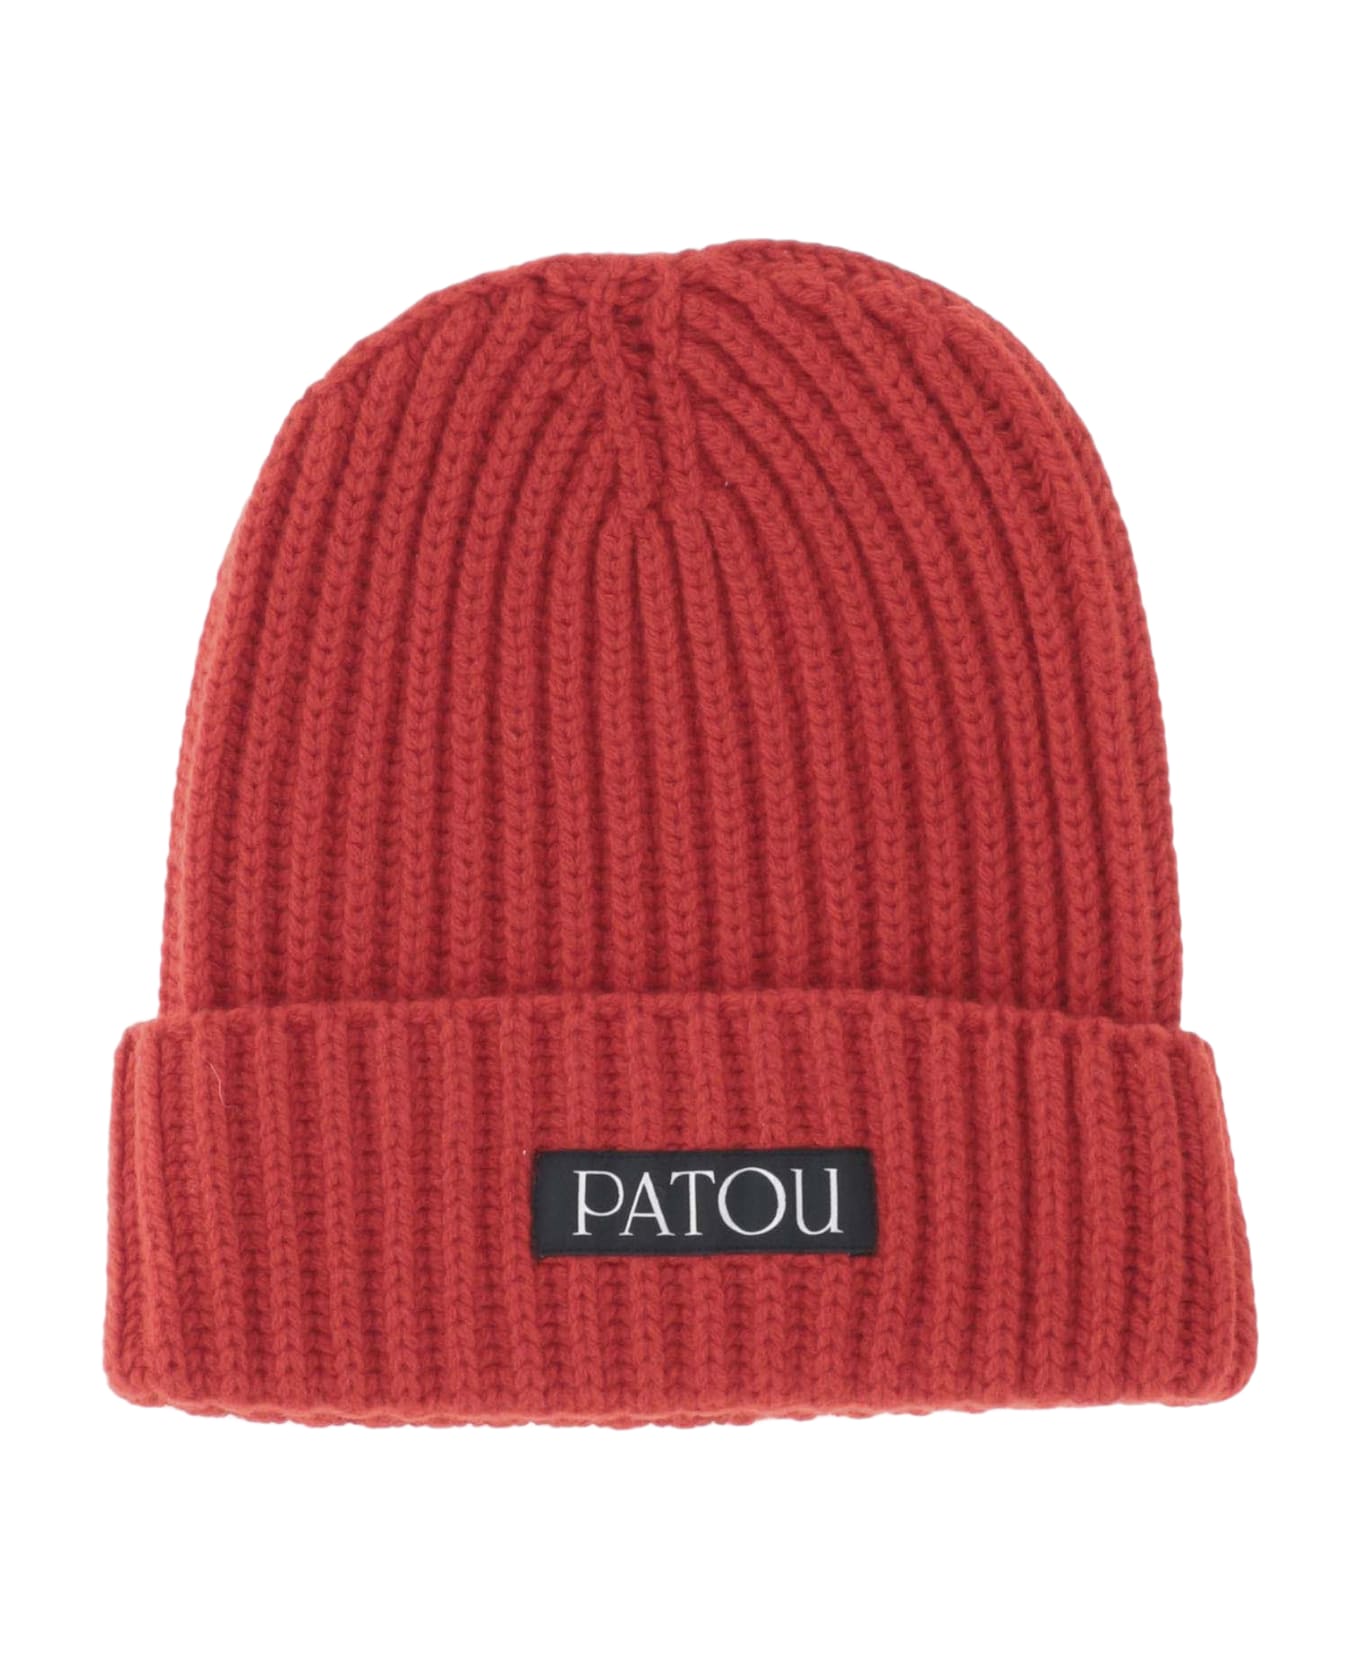 Patou Cashmere And Wool Beanie With Logo - Red